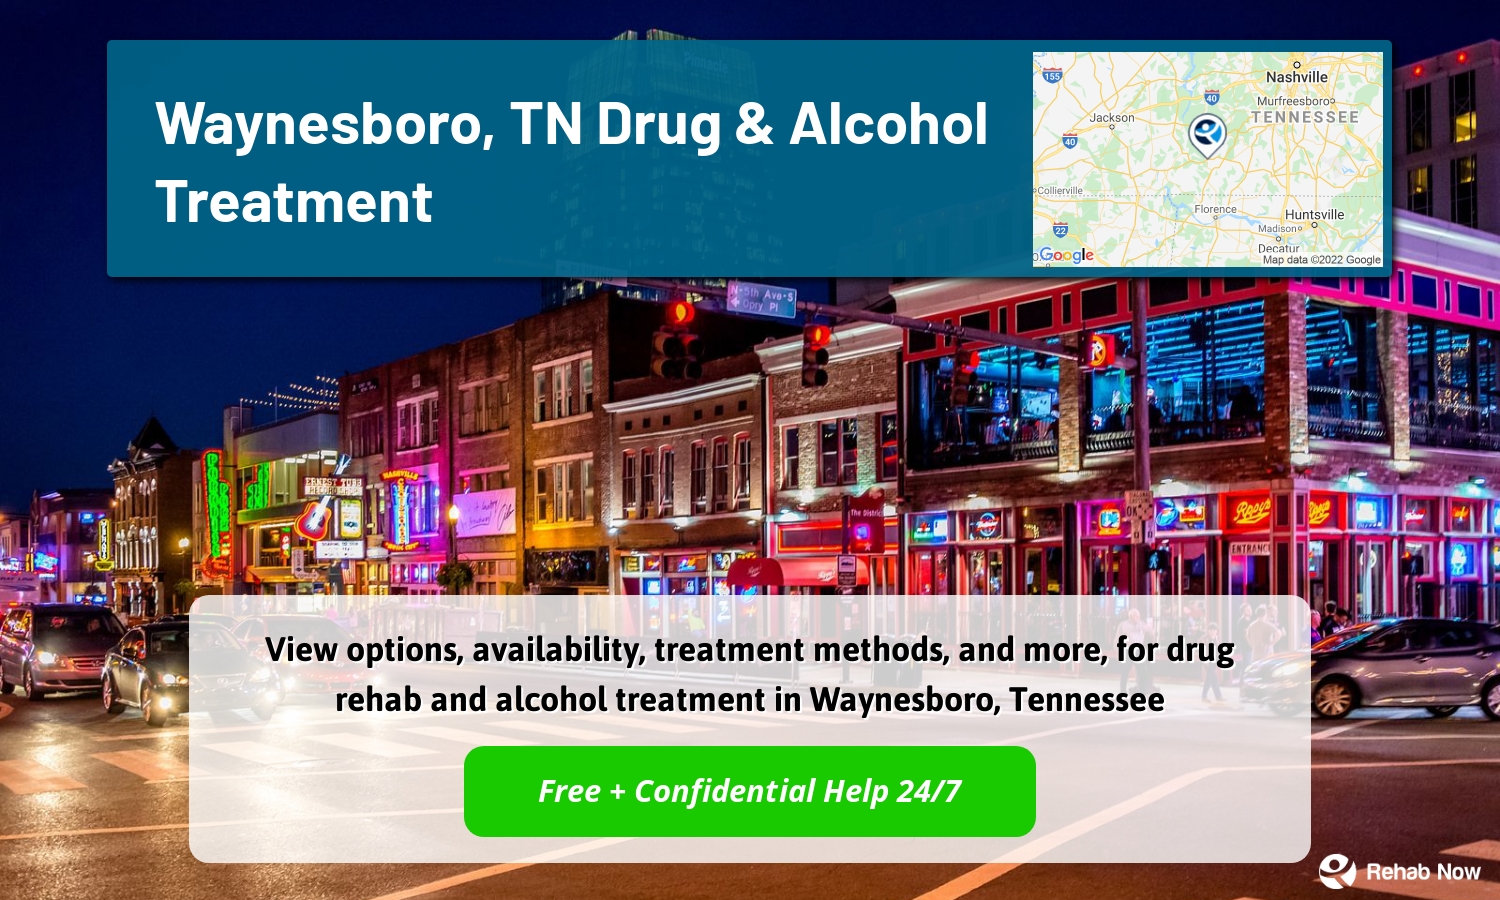 View options, availability, treatment methods, and more, for drug rehab and alcohol treatment in Waynesboro, Tennessee